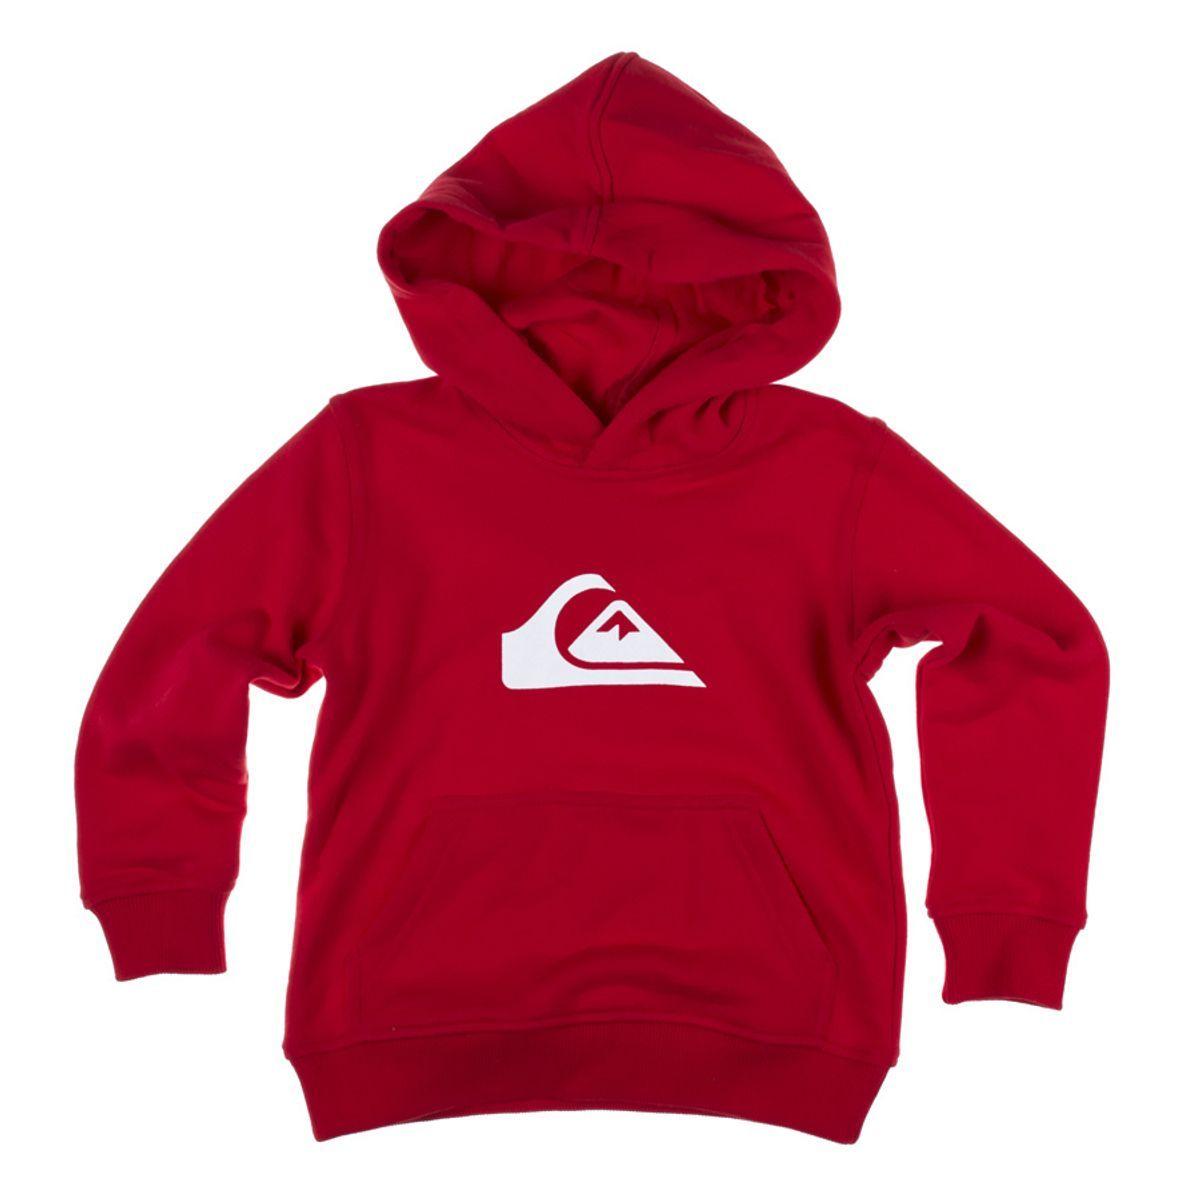 Wave and Red Mountain Logo - Quiksilver Logo Mountain And Waves Toddler Hoody Red. Free